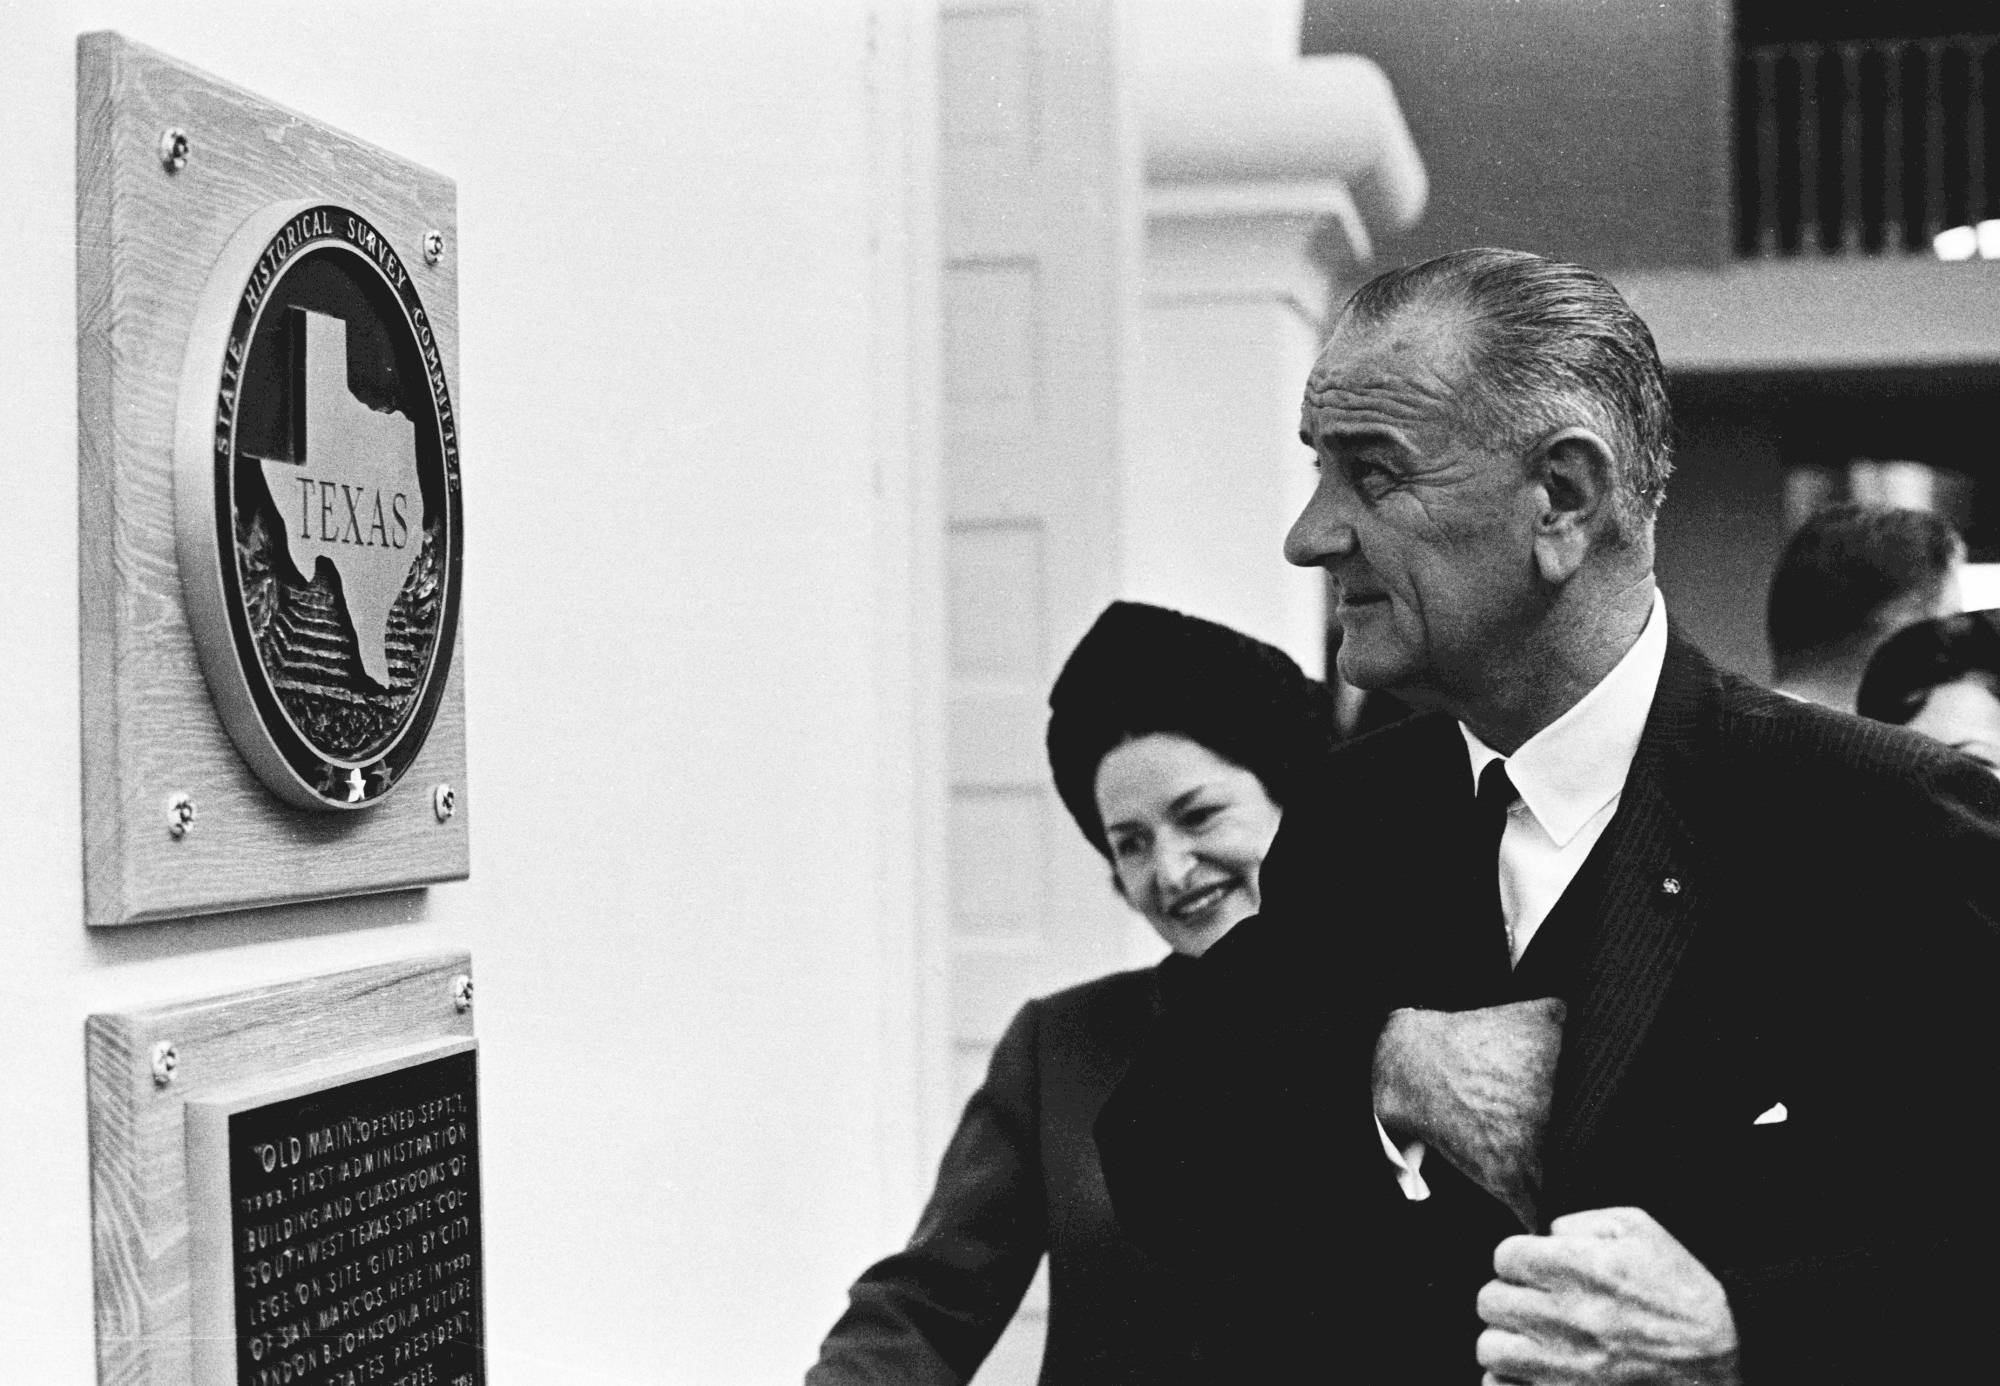 LBJ and first lady by Texas Plaque